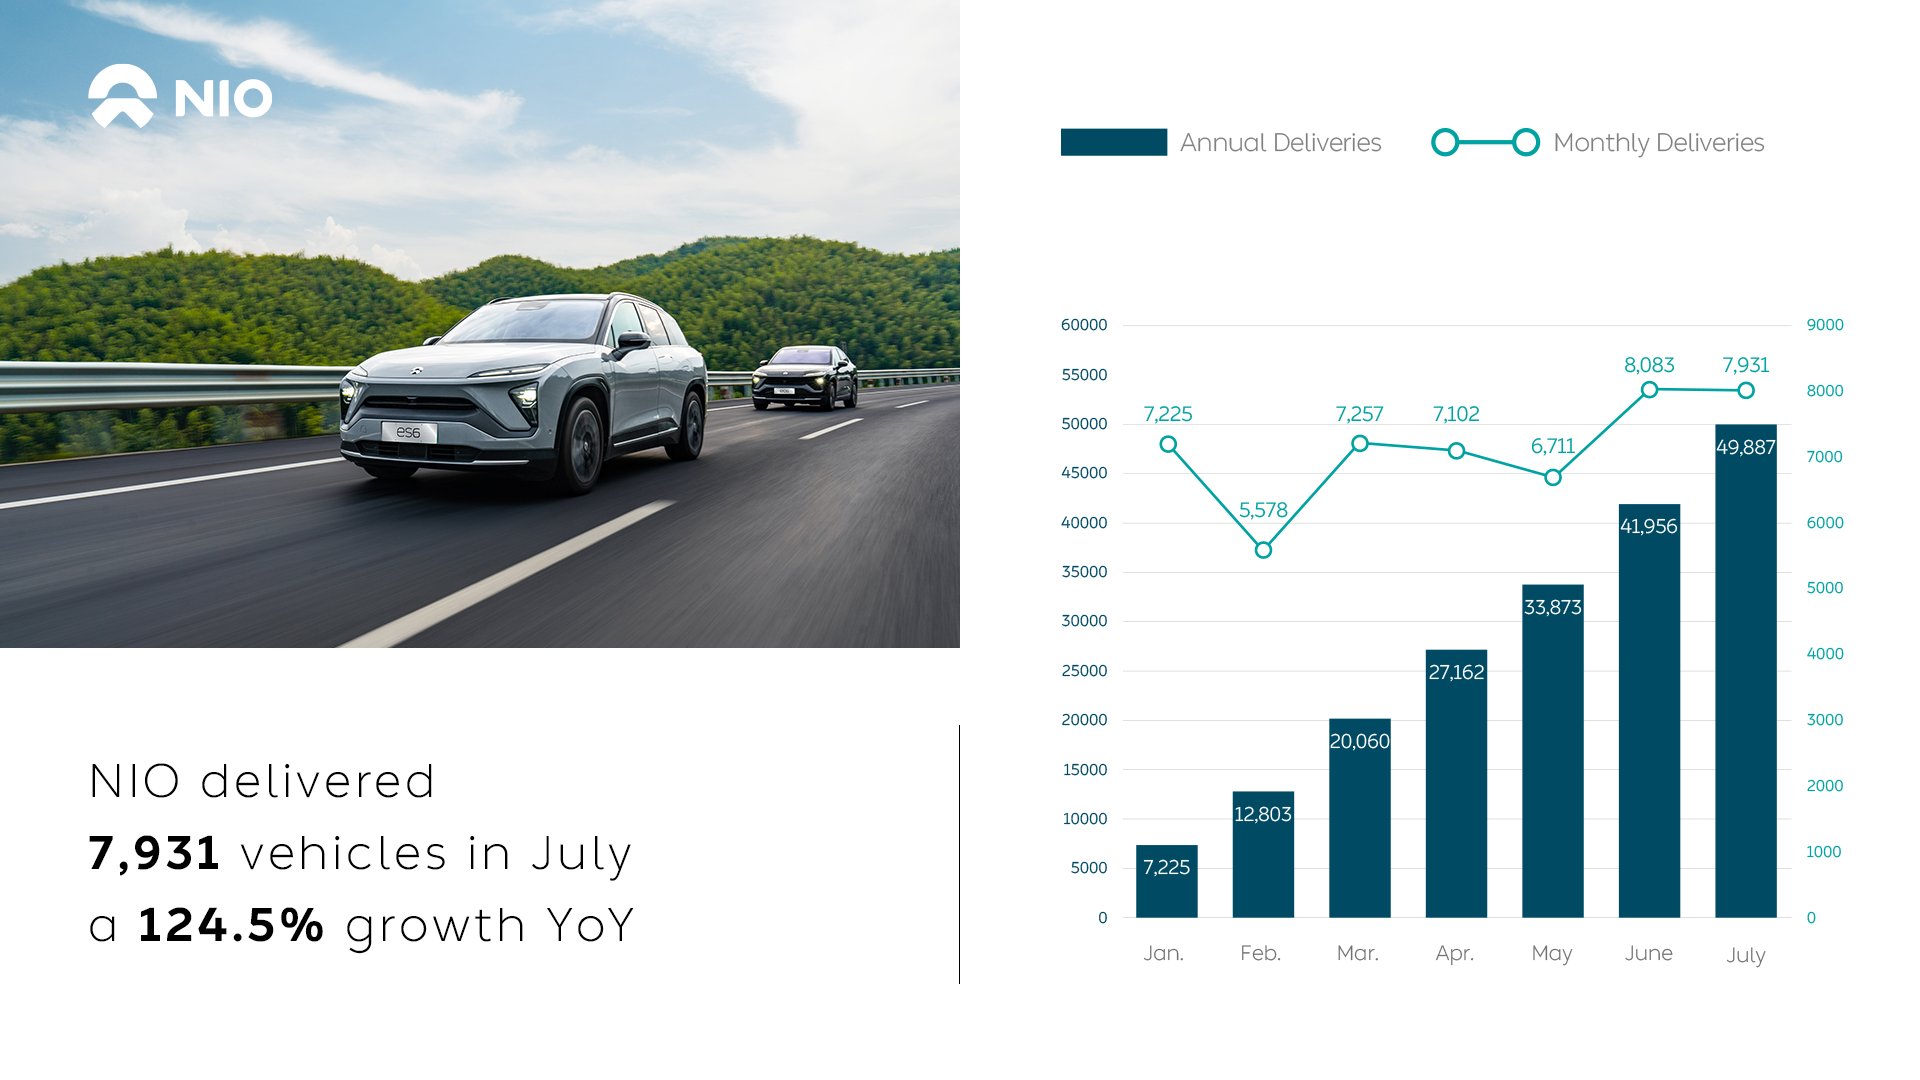 NIO on Twitter "NIO delivered 7,931 vehicles in July, a 124.5 growth